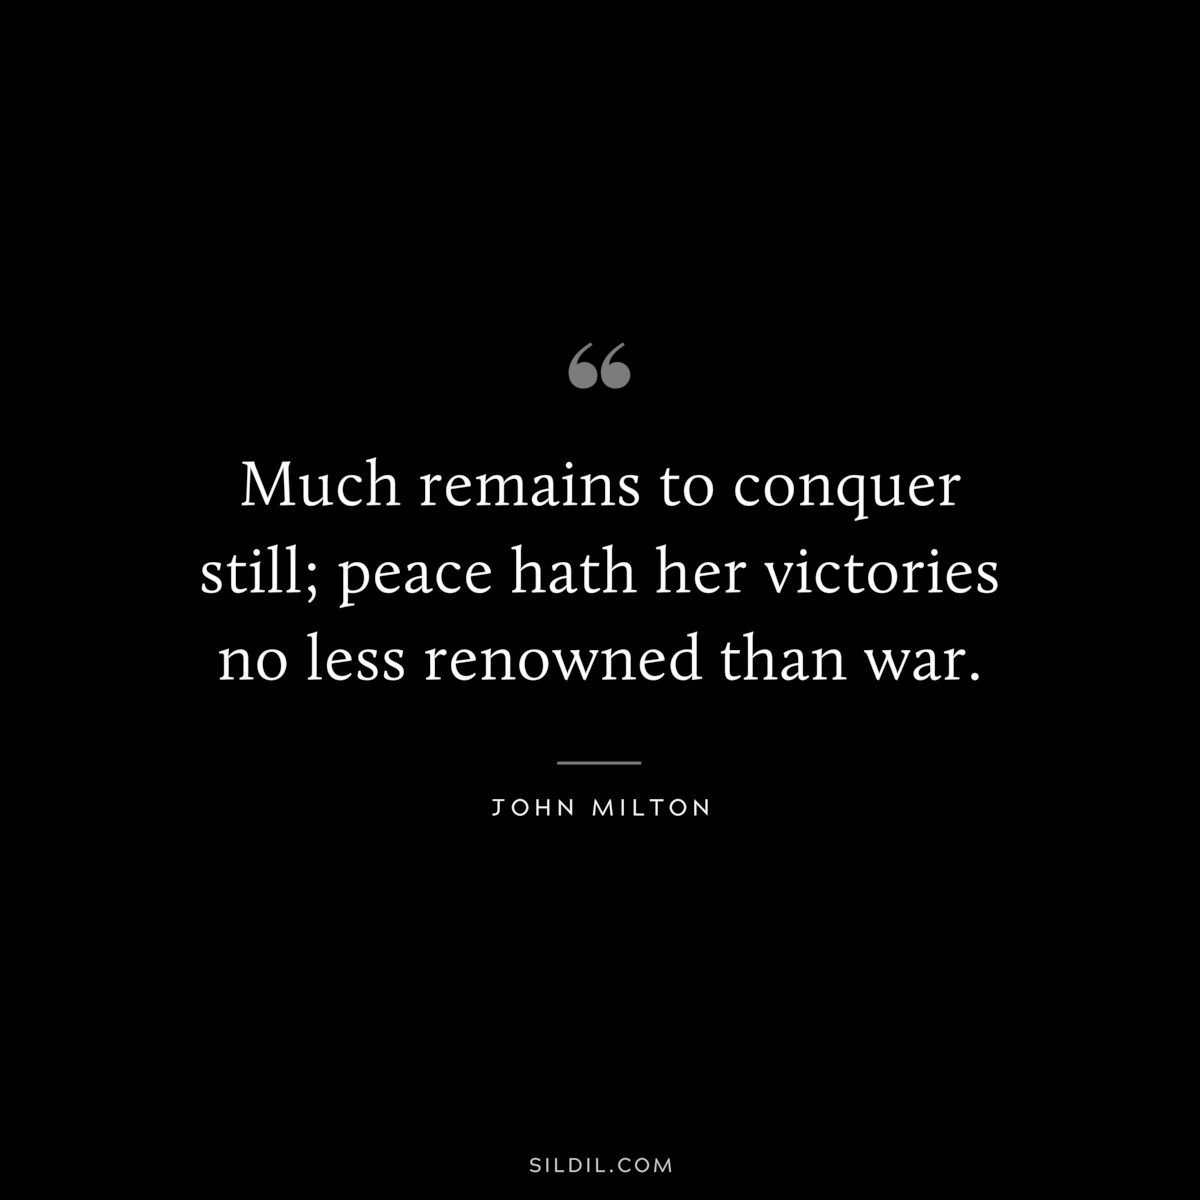 Much remains to conquer still; peace hath her victories no less renowned than war. ― John Milton